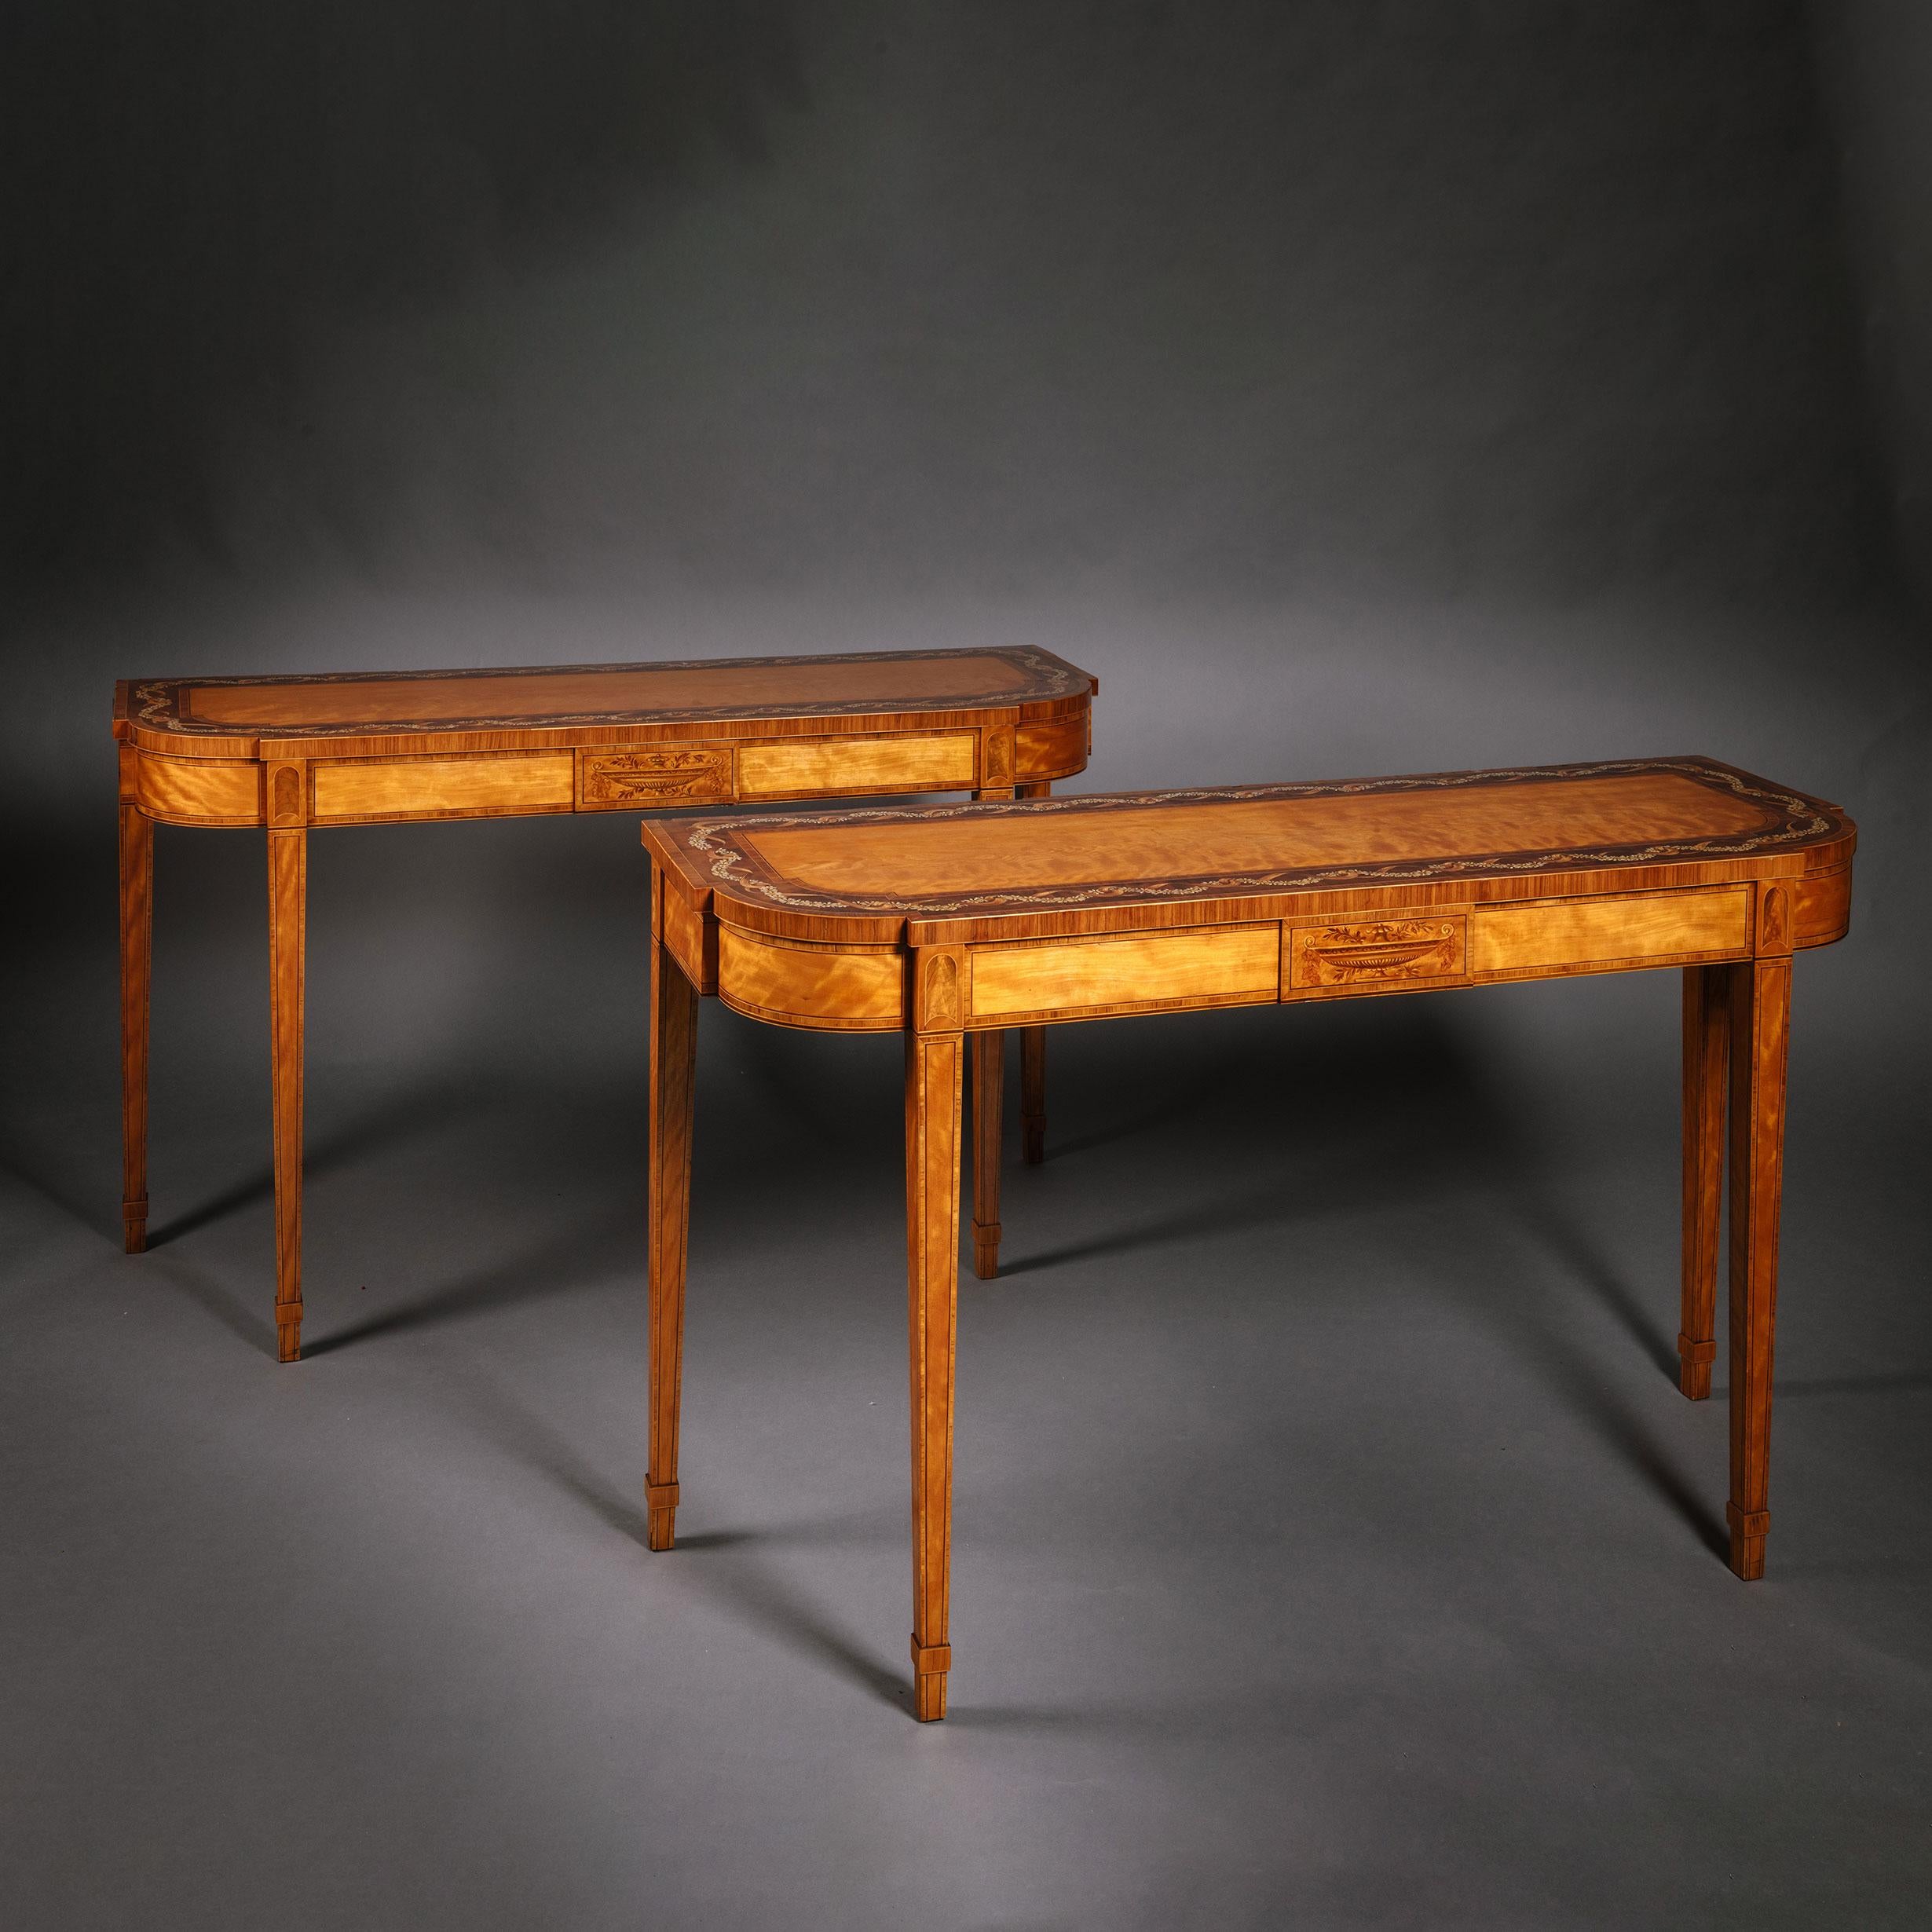 English Pair of George III Polychrome-Decorated Satinwood Console Tables For Sale